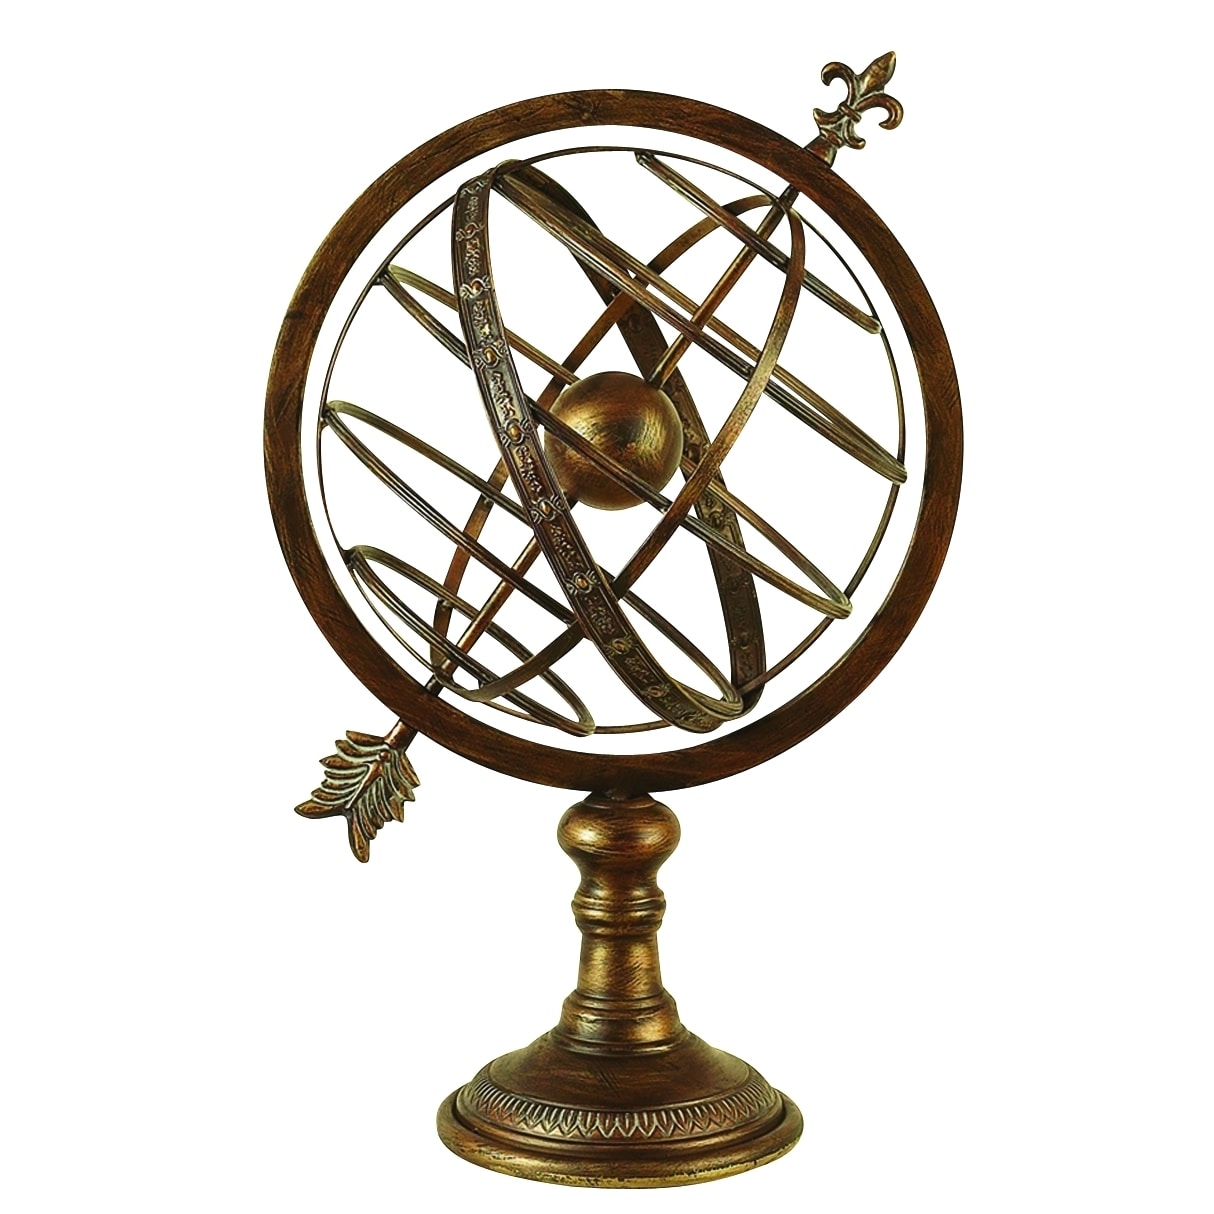 Shop Metal Armillary Sphere - Free Shipping On Orders Over $45